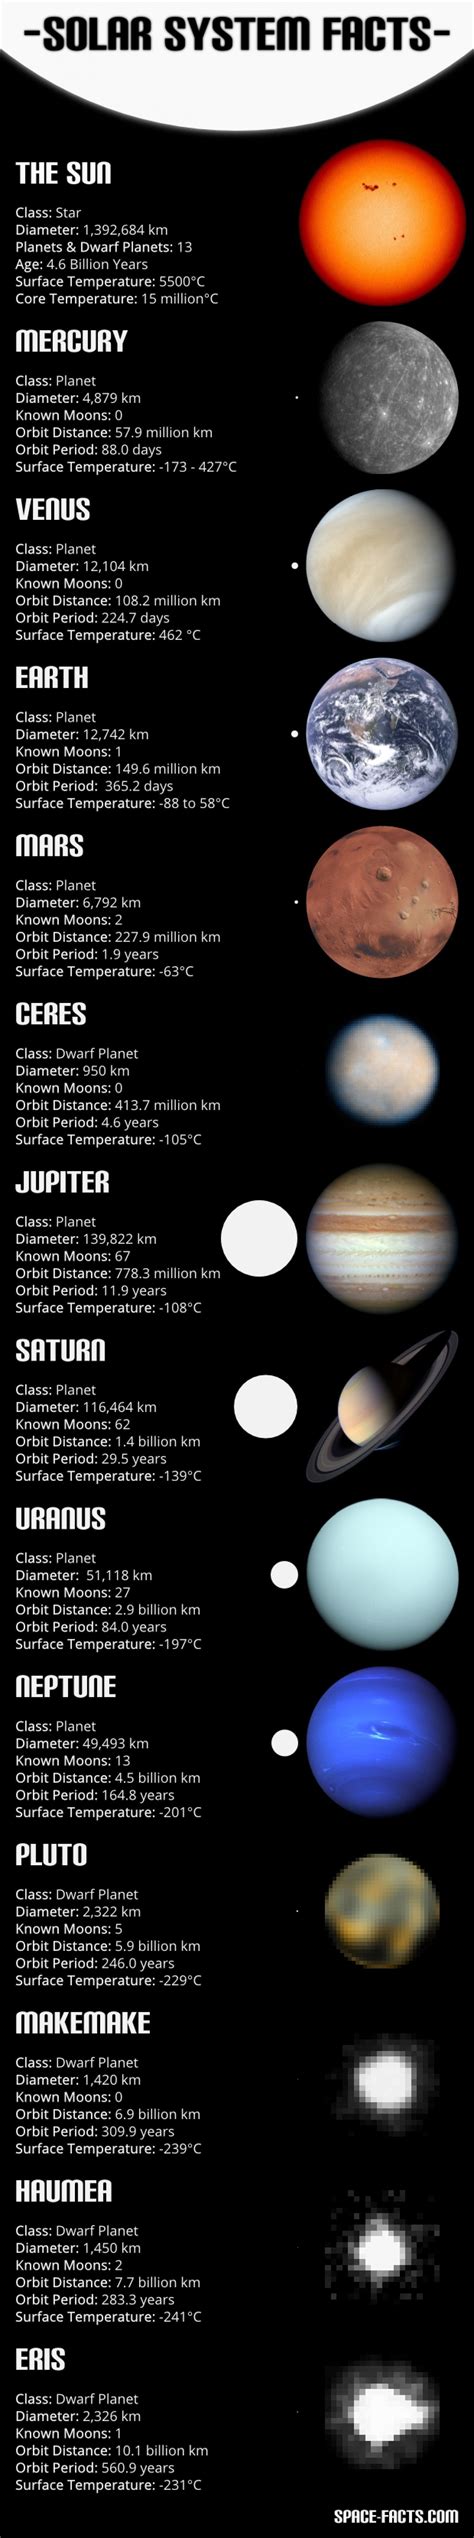 Solar System Facts About Each Planet